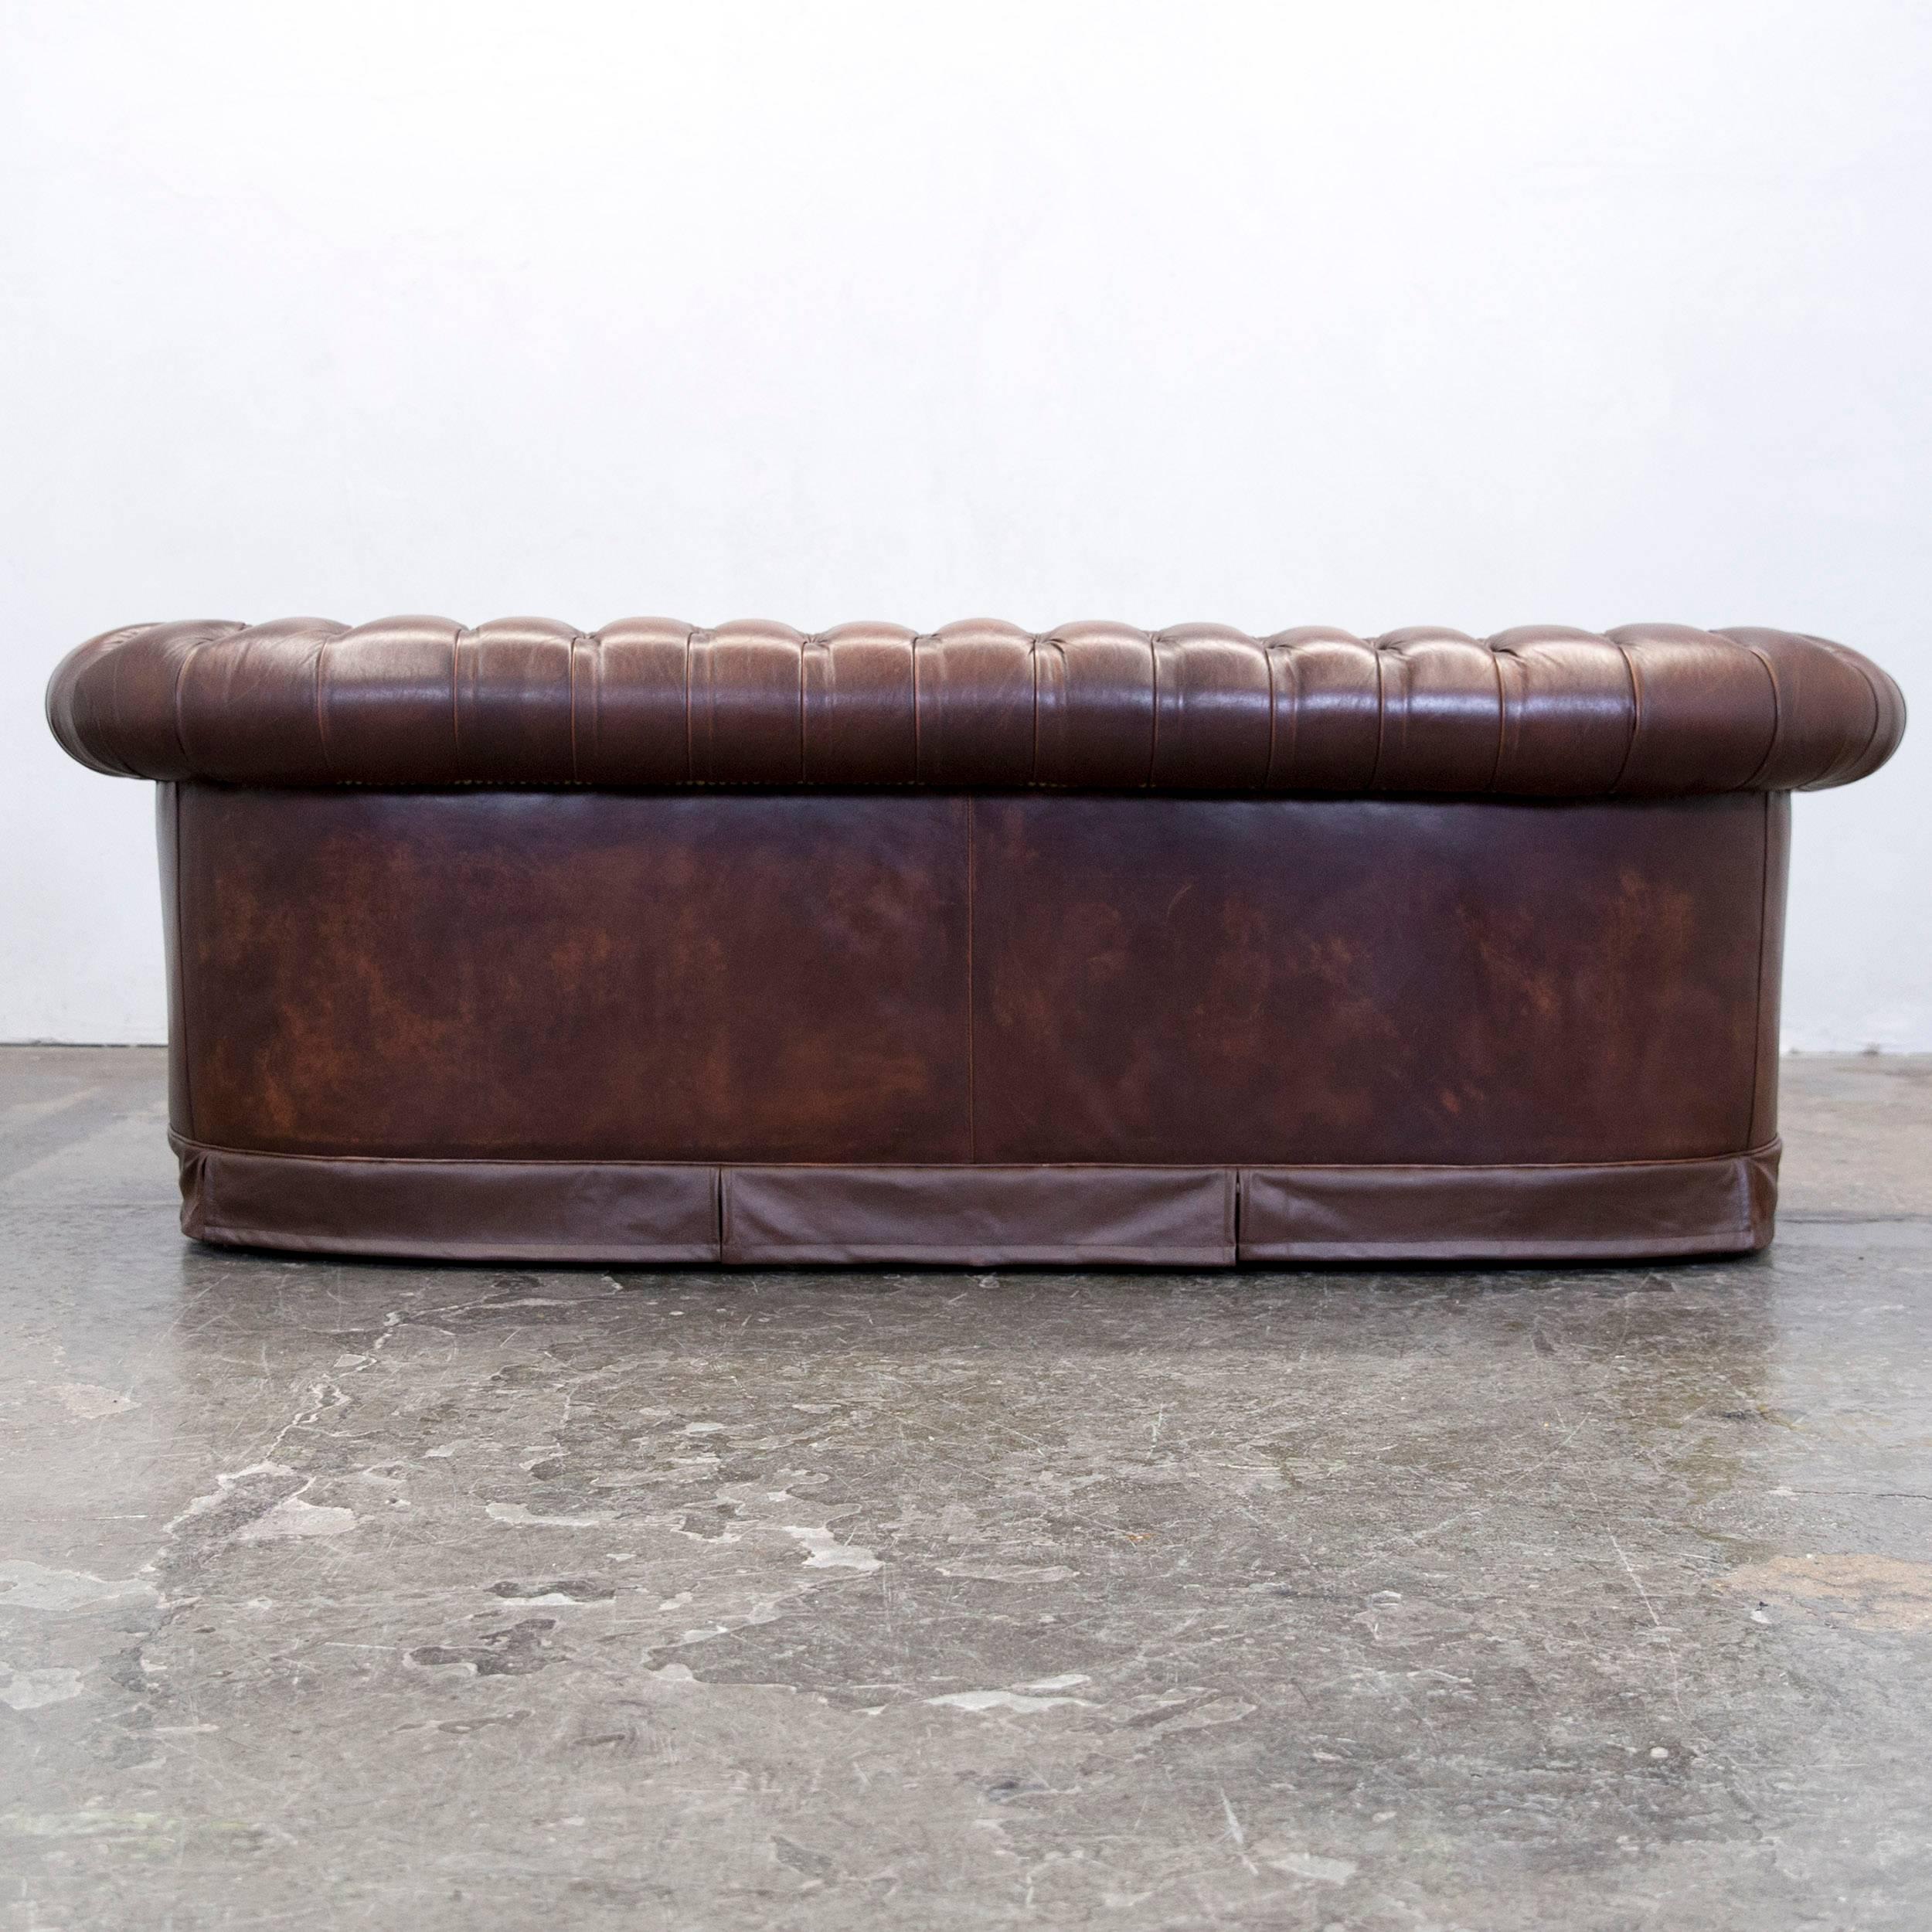 Original Chesterfield Leather Sofa Two-Seat Couch Brown Vintage Retro 6